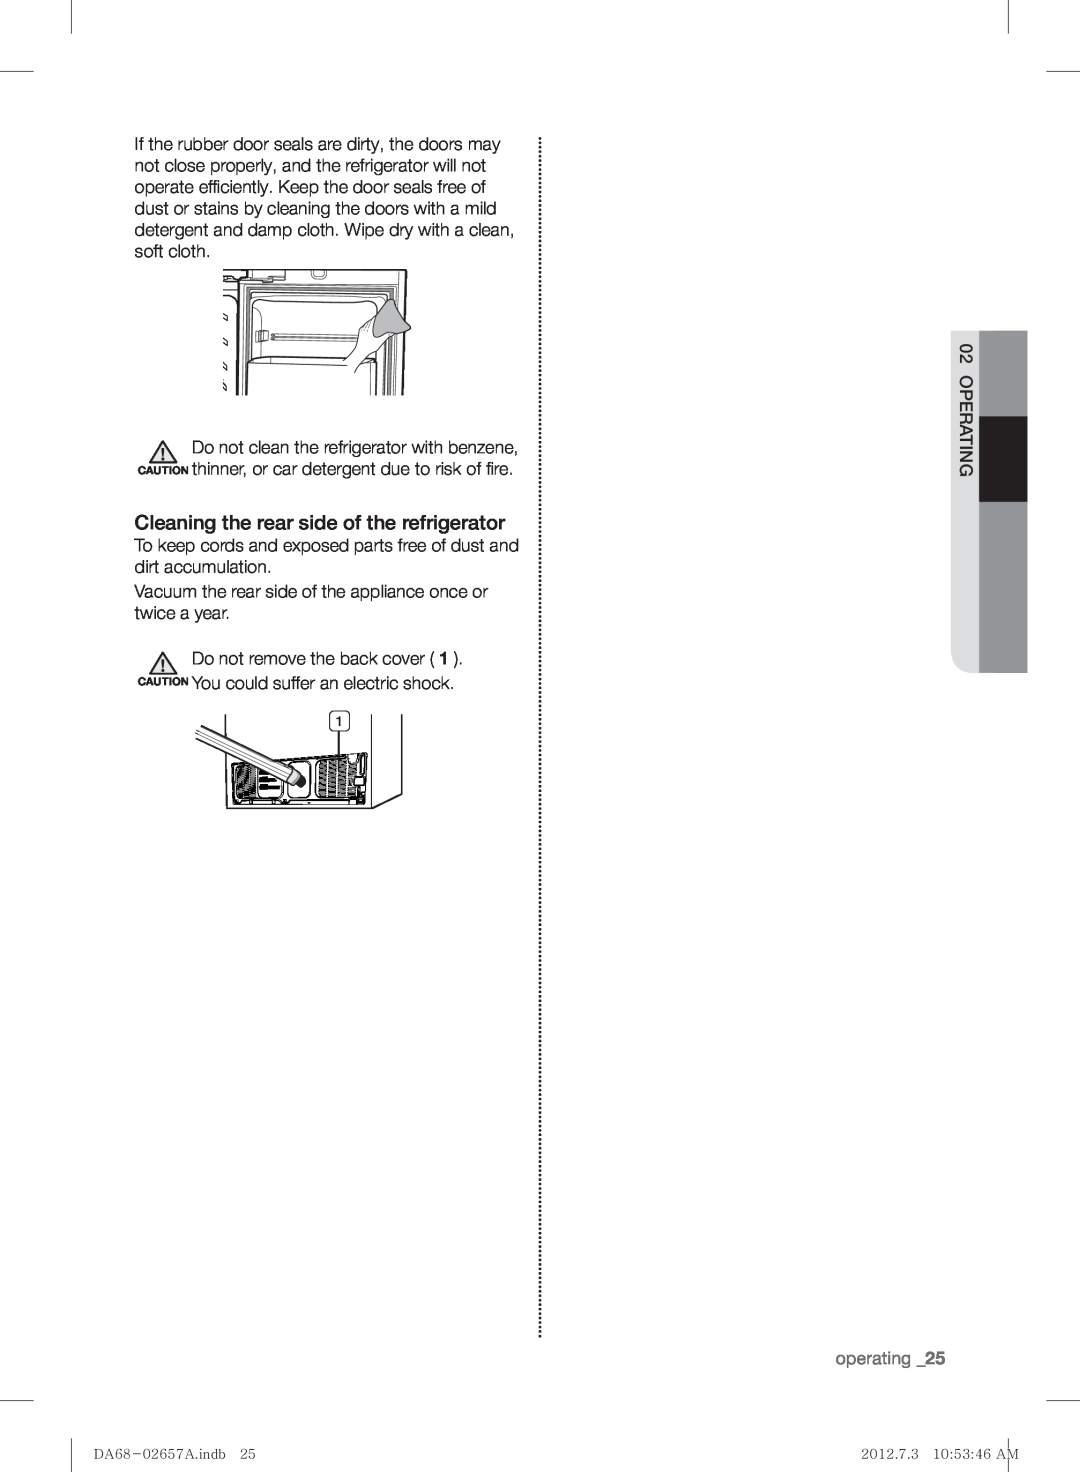 Samsung RF221NCTABC user manual Cleaning the rear side of the refrigerator, operating 